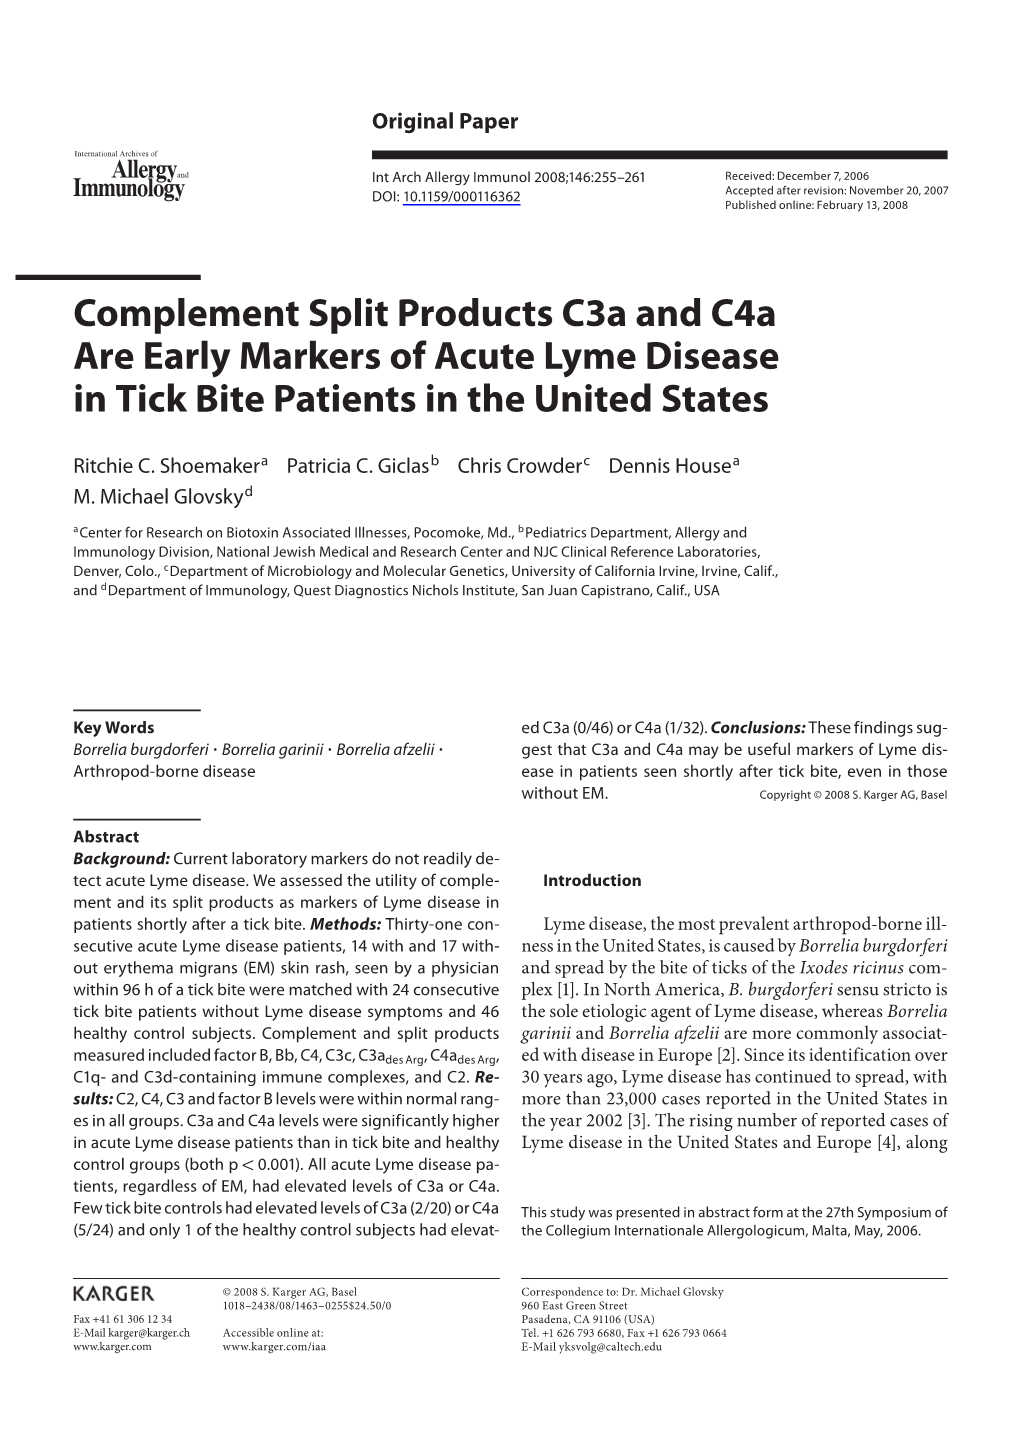 Complement Split Products C3a and C4a Are Early Markers of Acute Lyme Disease in Tick Bite Patients in the United States